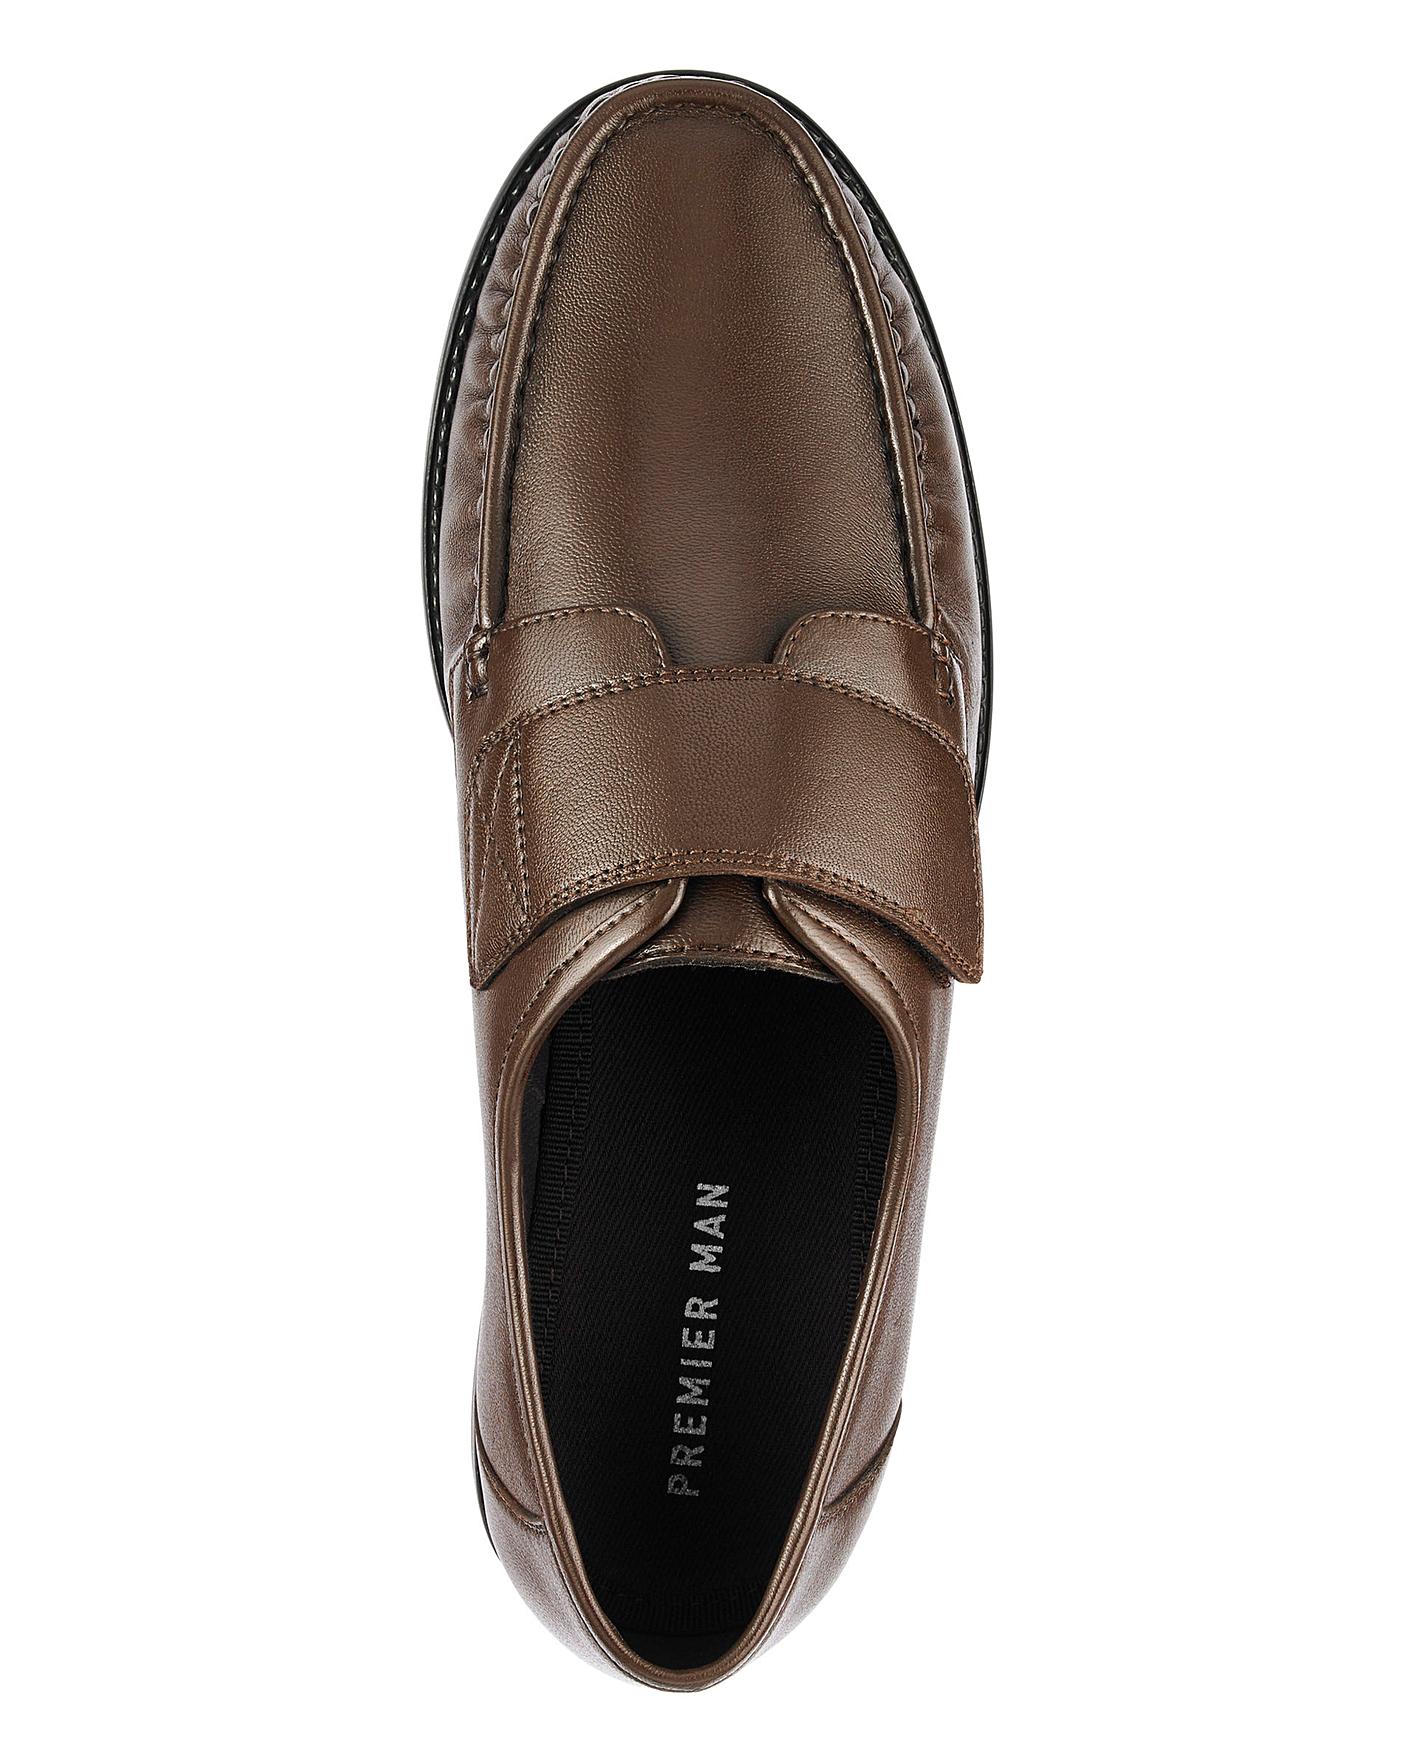 Easy Fasten Leather Moccasin Wide Fit | J D Williams